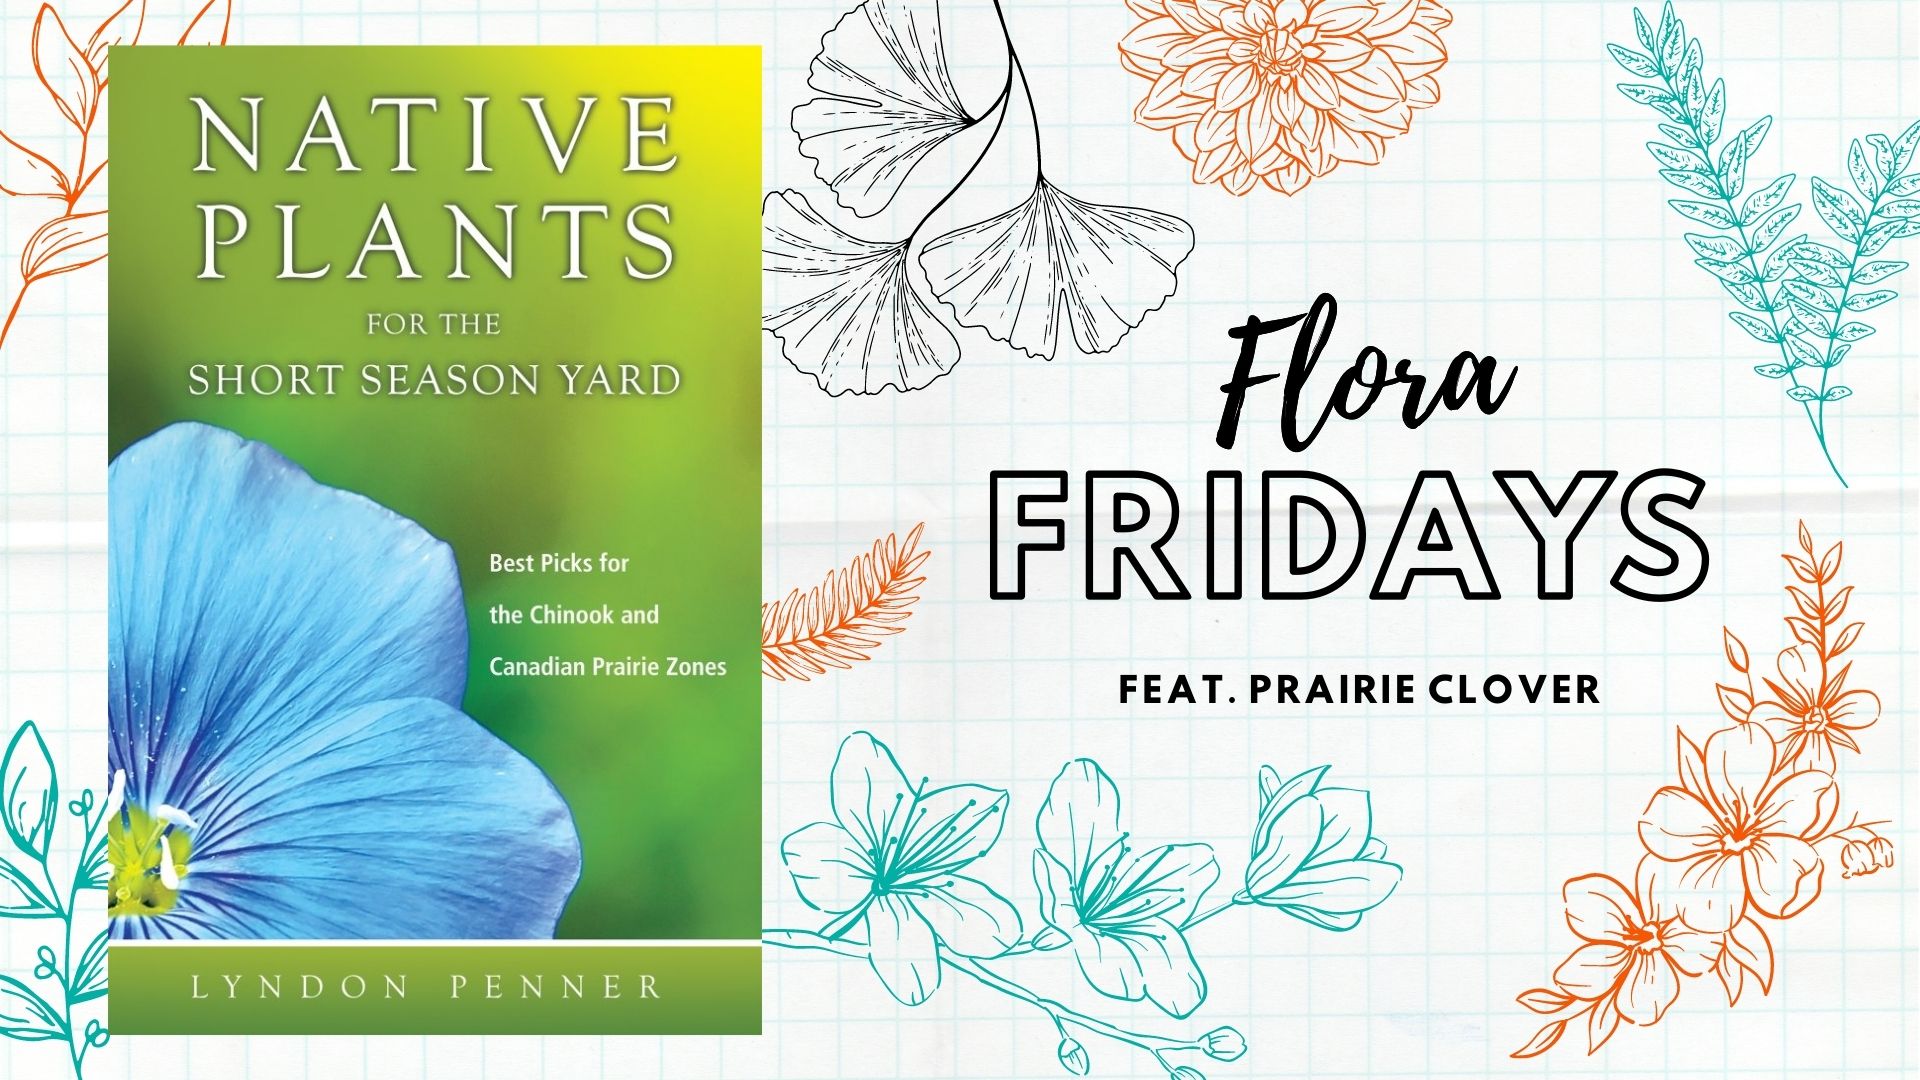 Flora Fridays feature image with the book cover for Native Plants for the Short Season Yard